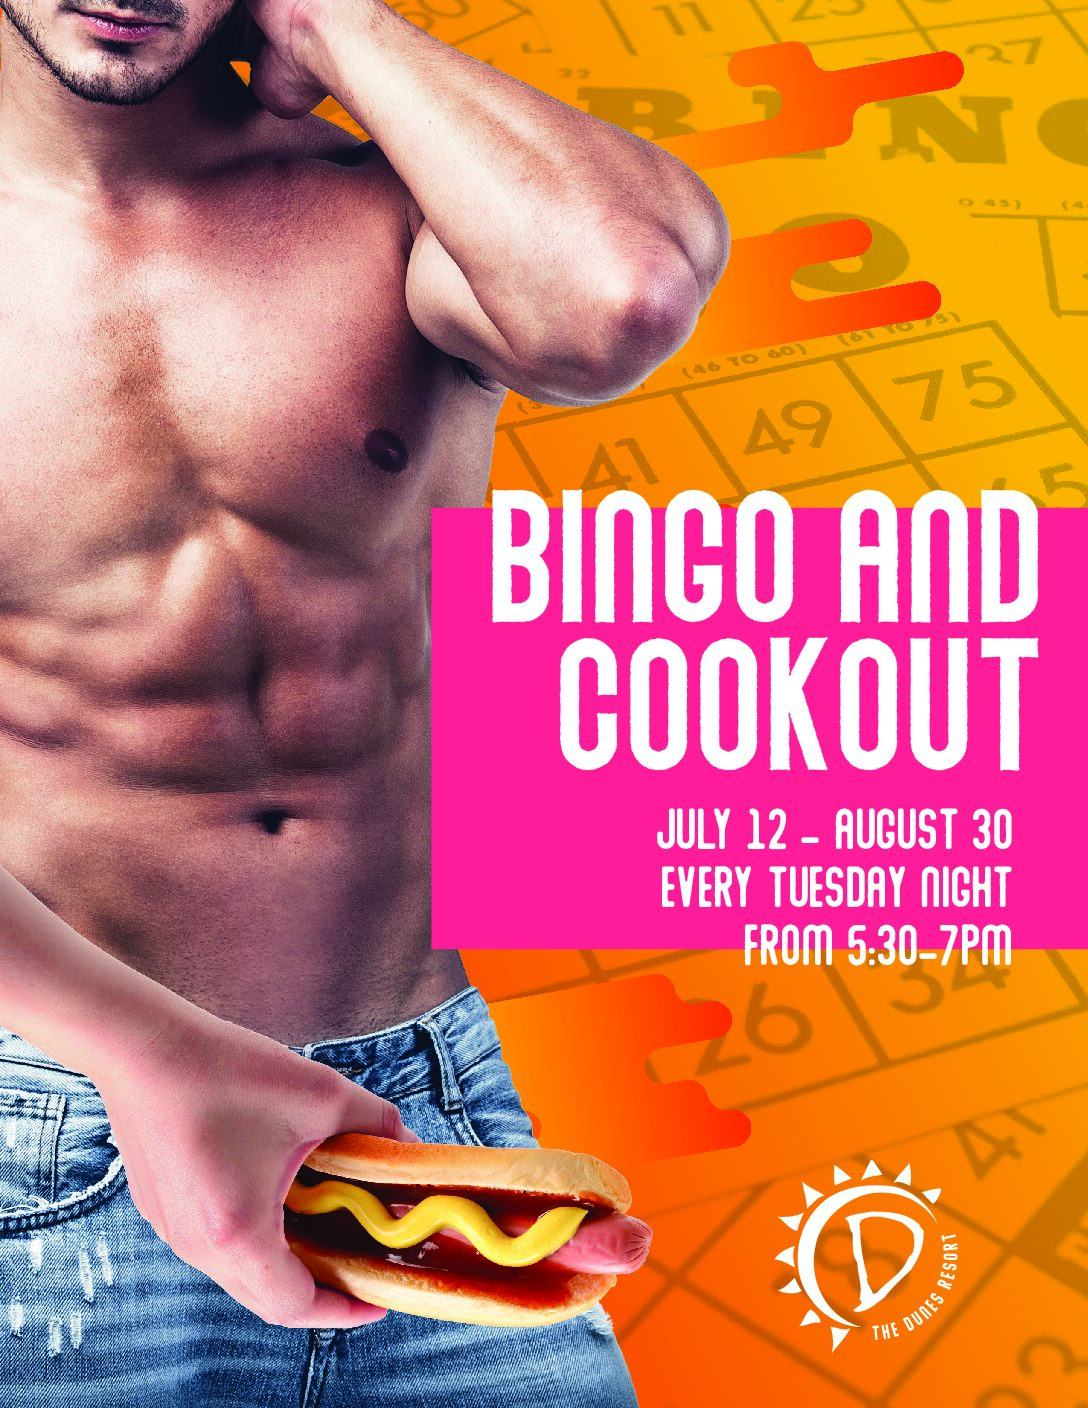 Tuesday Night Cookout and Bingo